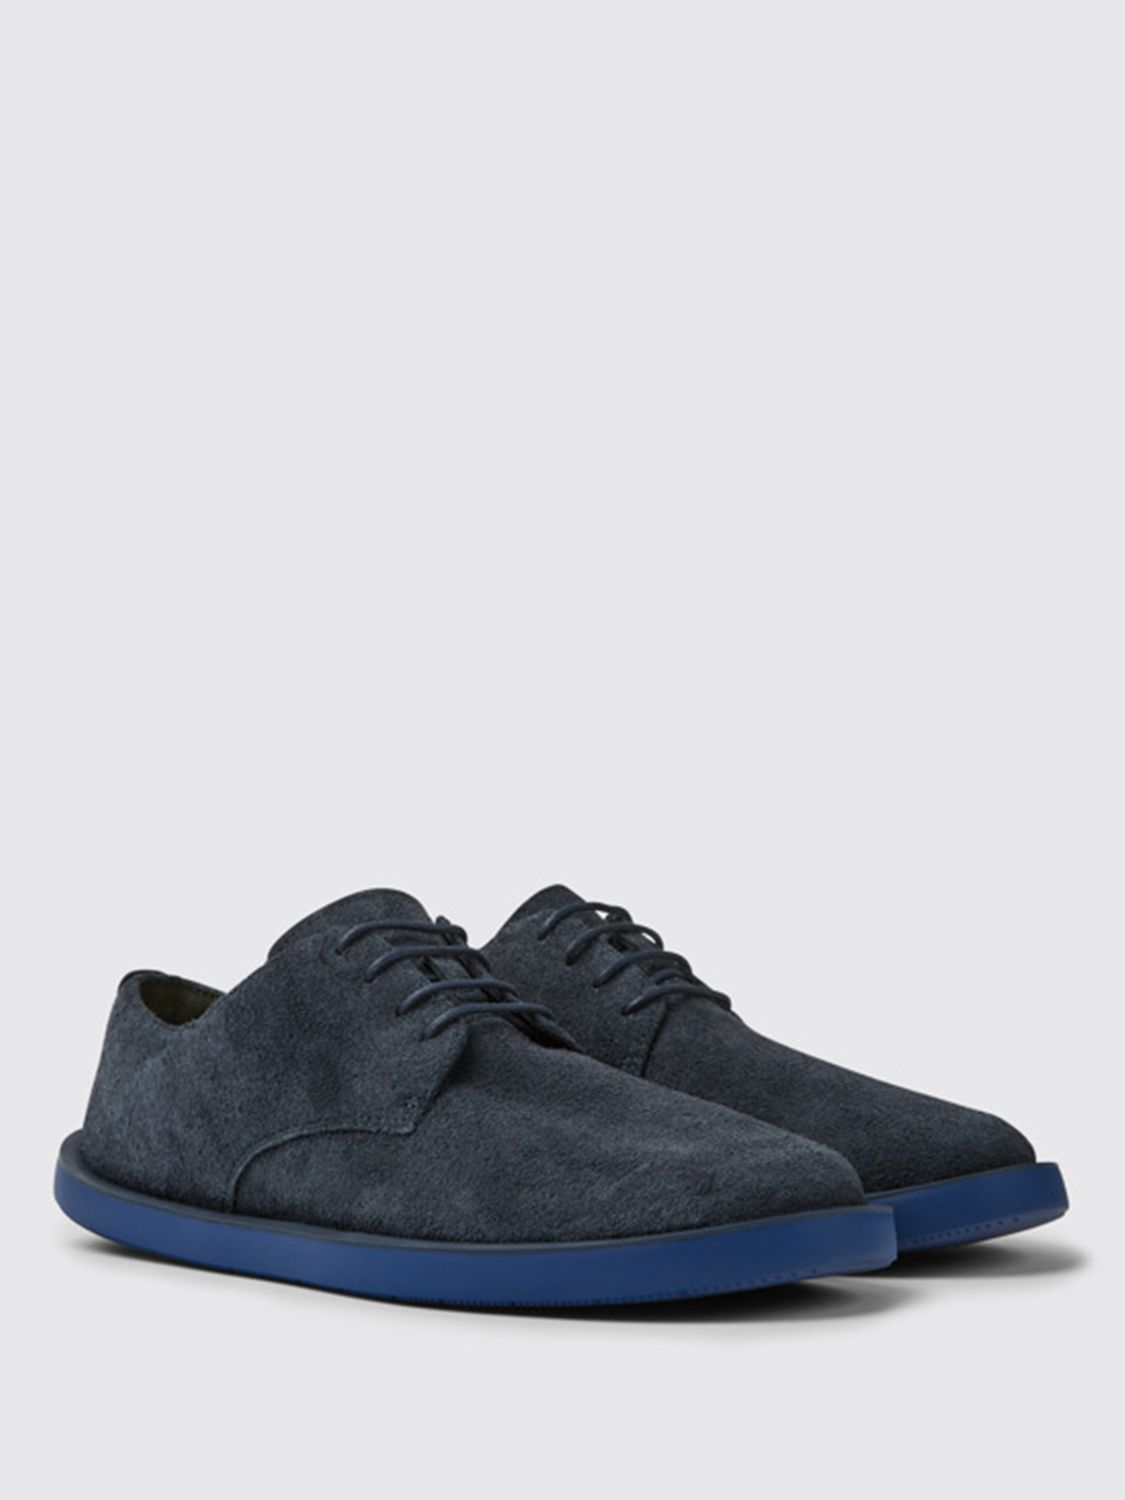 Camper Outlet: Wagon ankle boots in nubuck - Blue | Camper brogue shoes ...